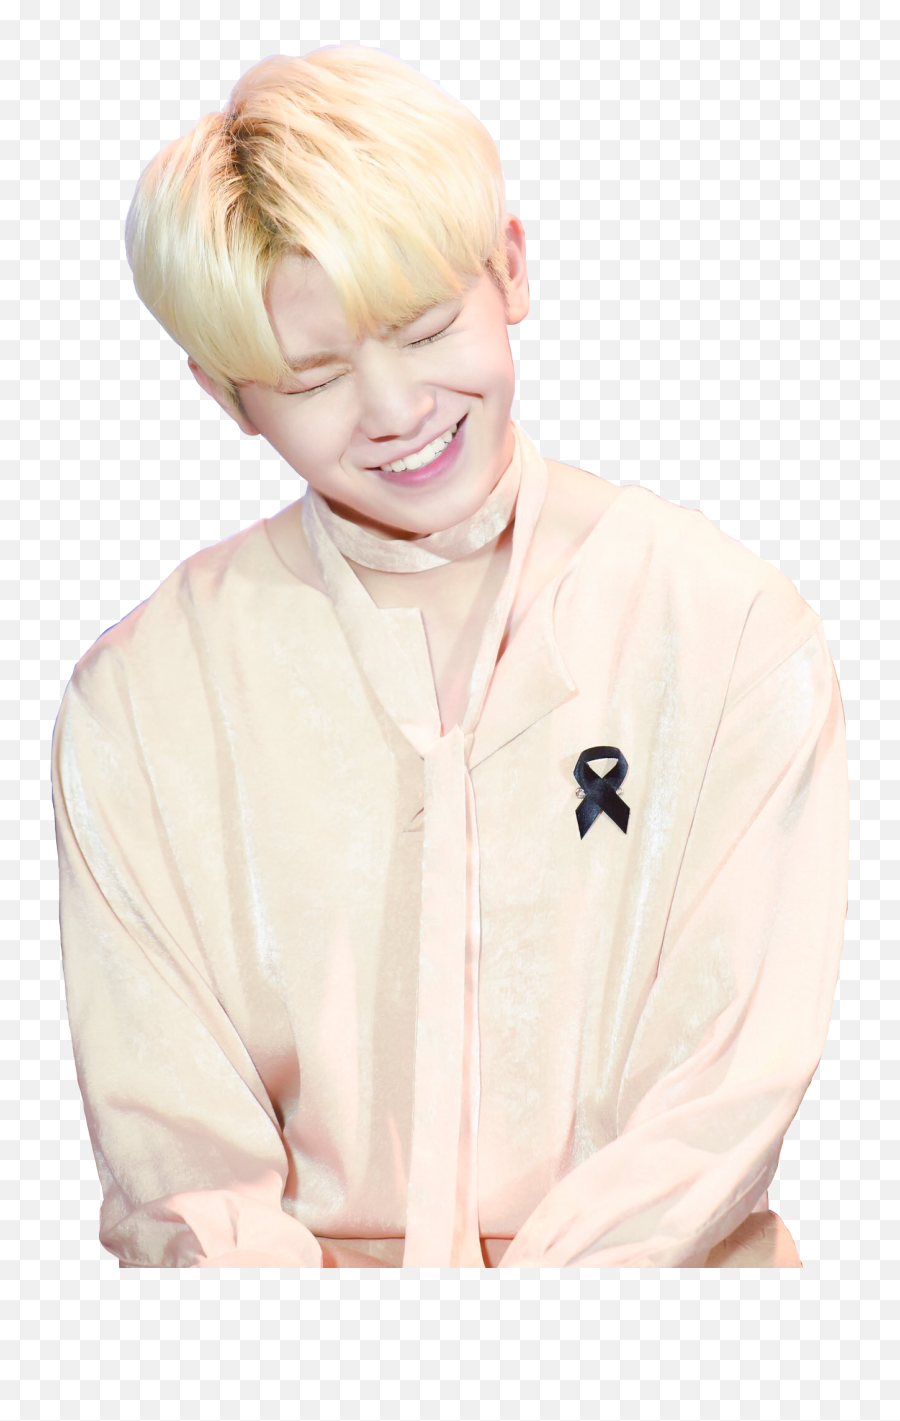 The Most Edited Woozisvt Picsart - For Kid Png,Woozi Icon